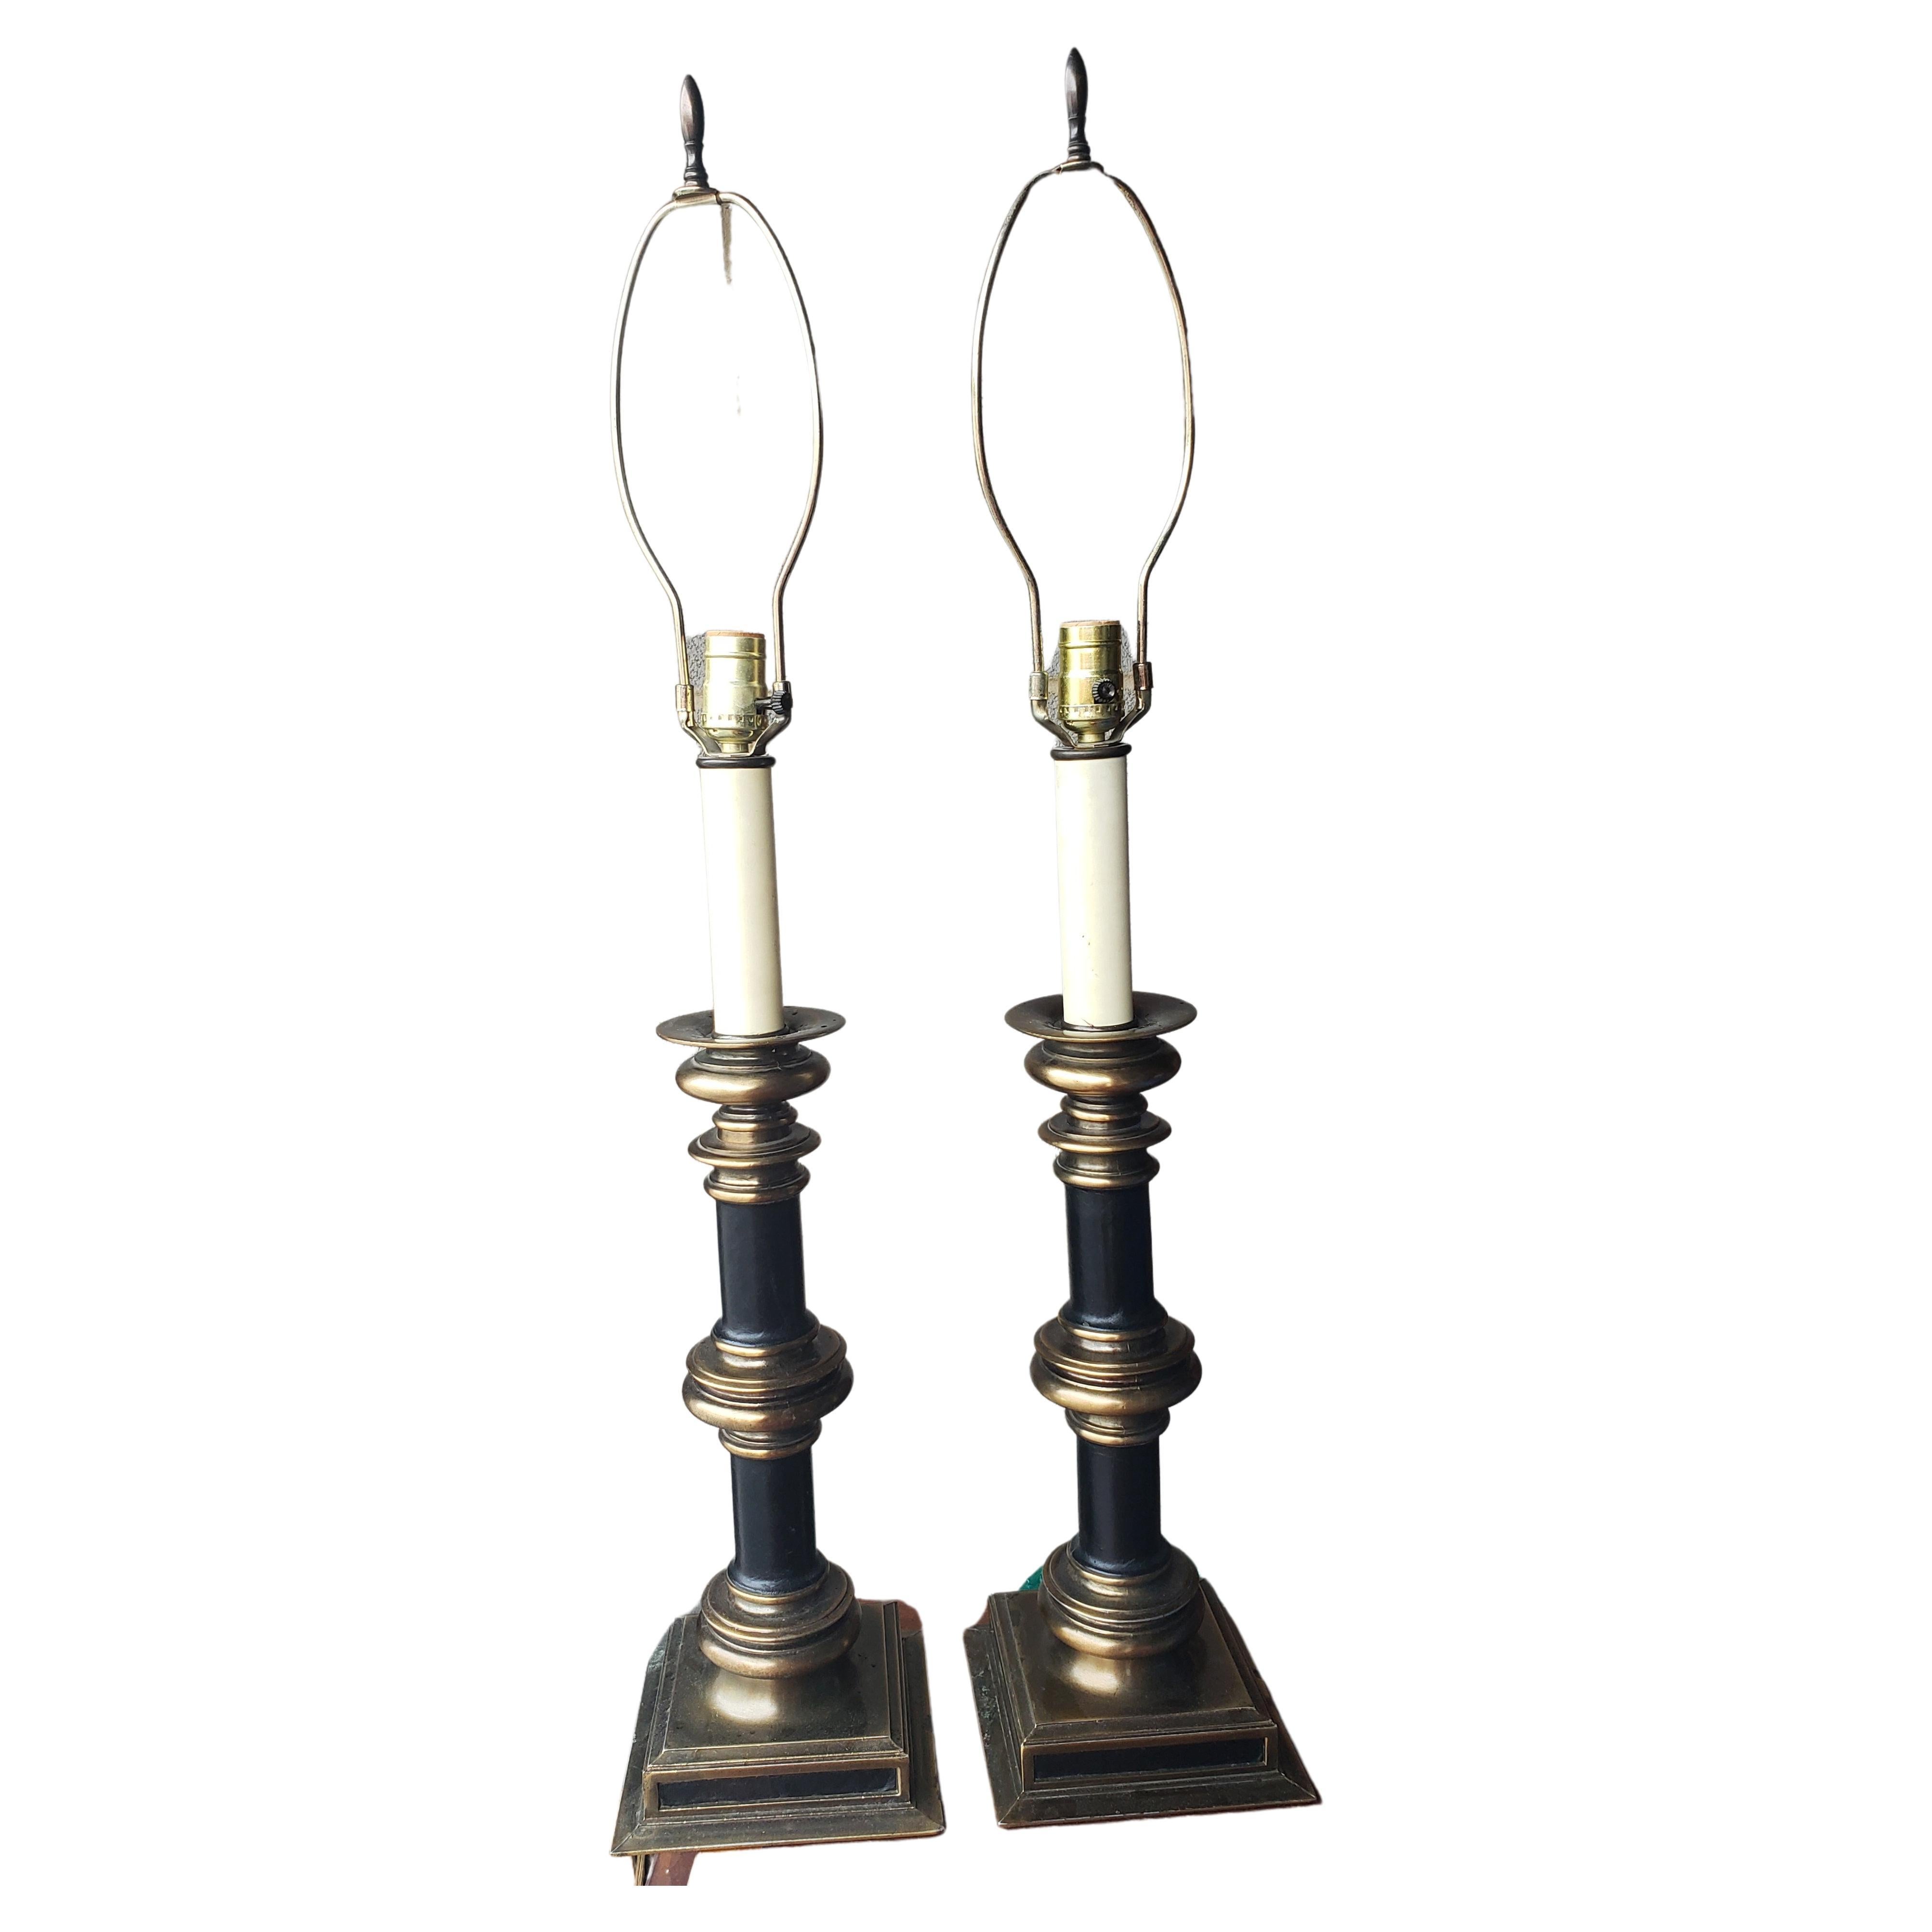 A fabulous pair of Charles X style black leather Mounted Patinated metal columnar table lamps.
Measures 7